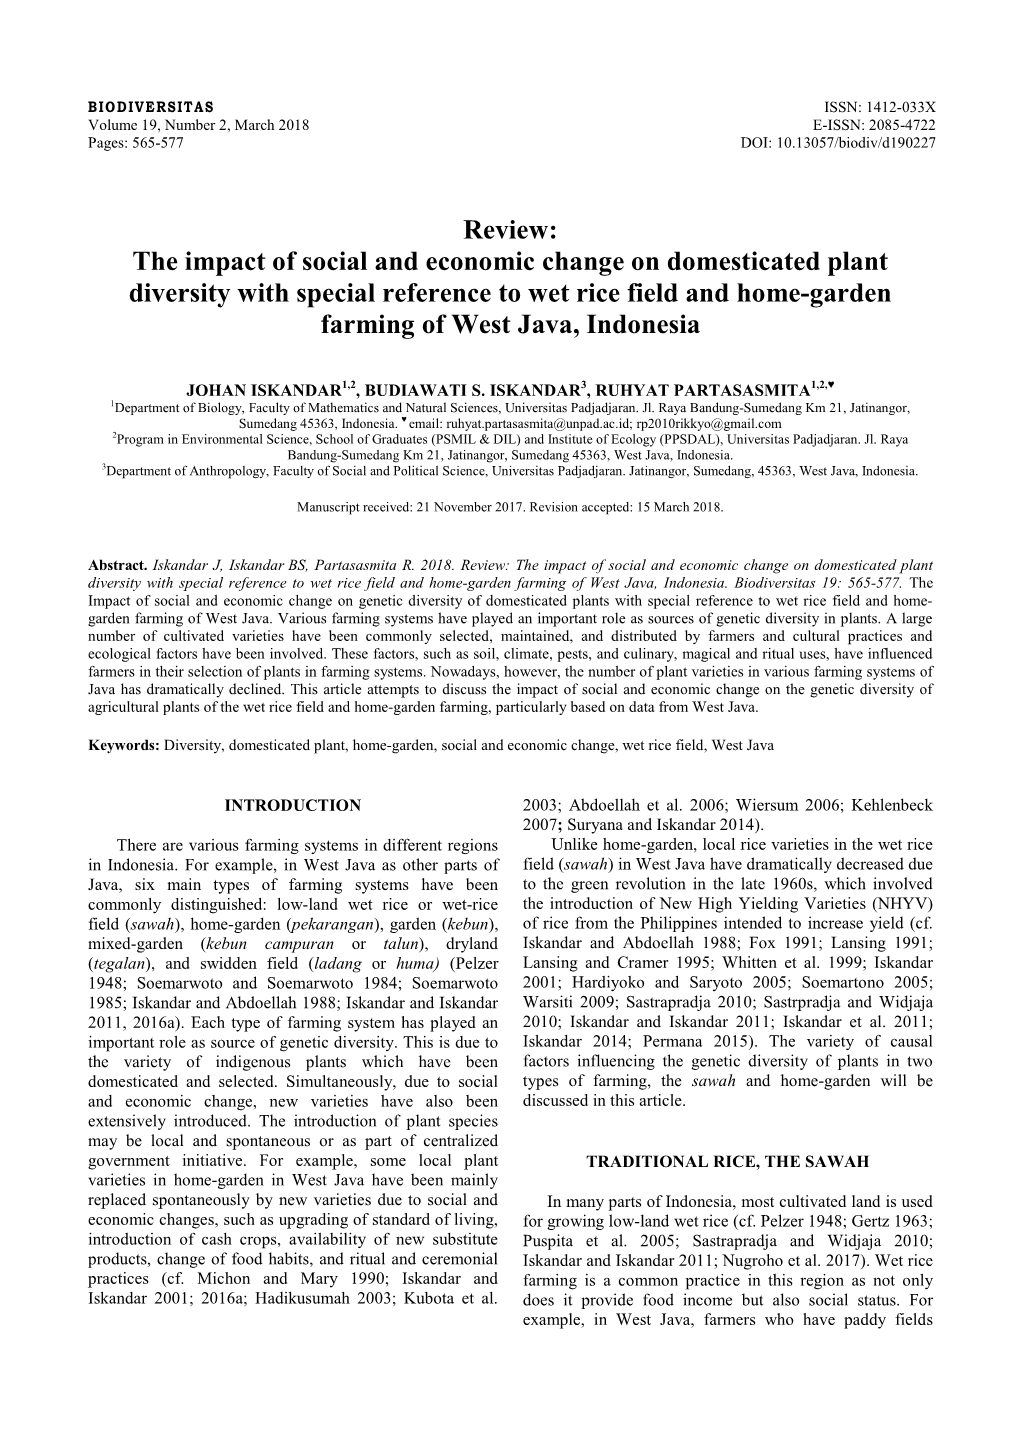 The Impact of Social and Economic Change on Domesticated Plant Diversity with Special Reference to Wet Rice Field and Home-Garden Farming of West Java, Indonesia